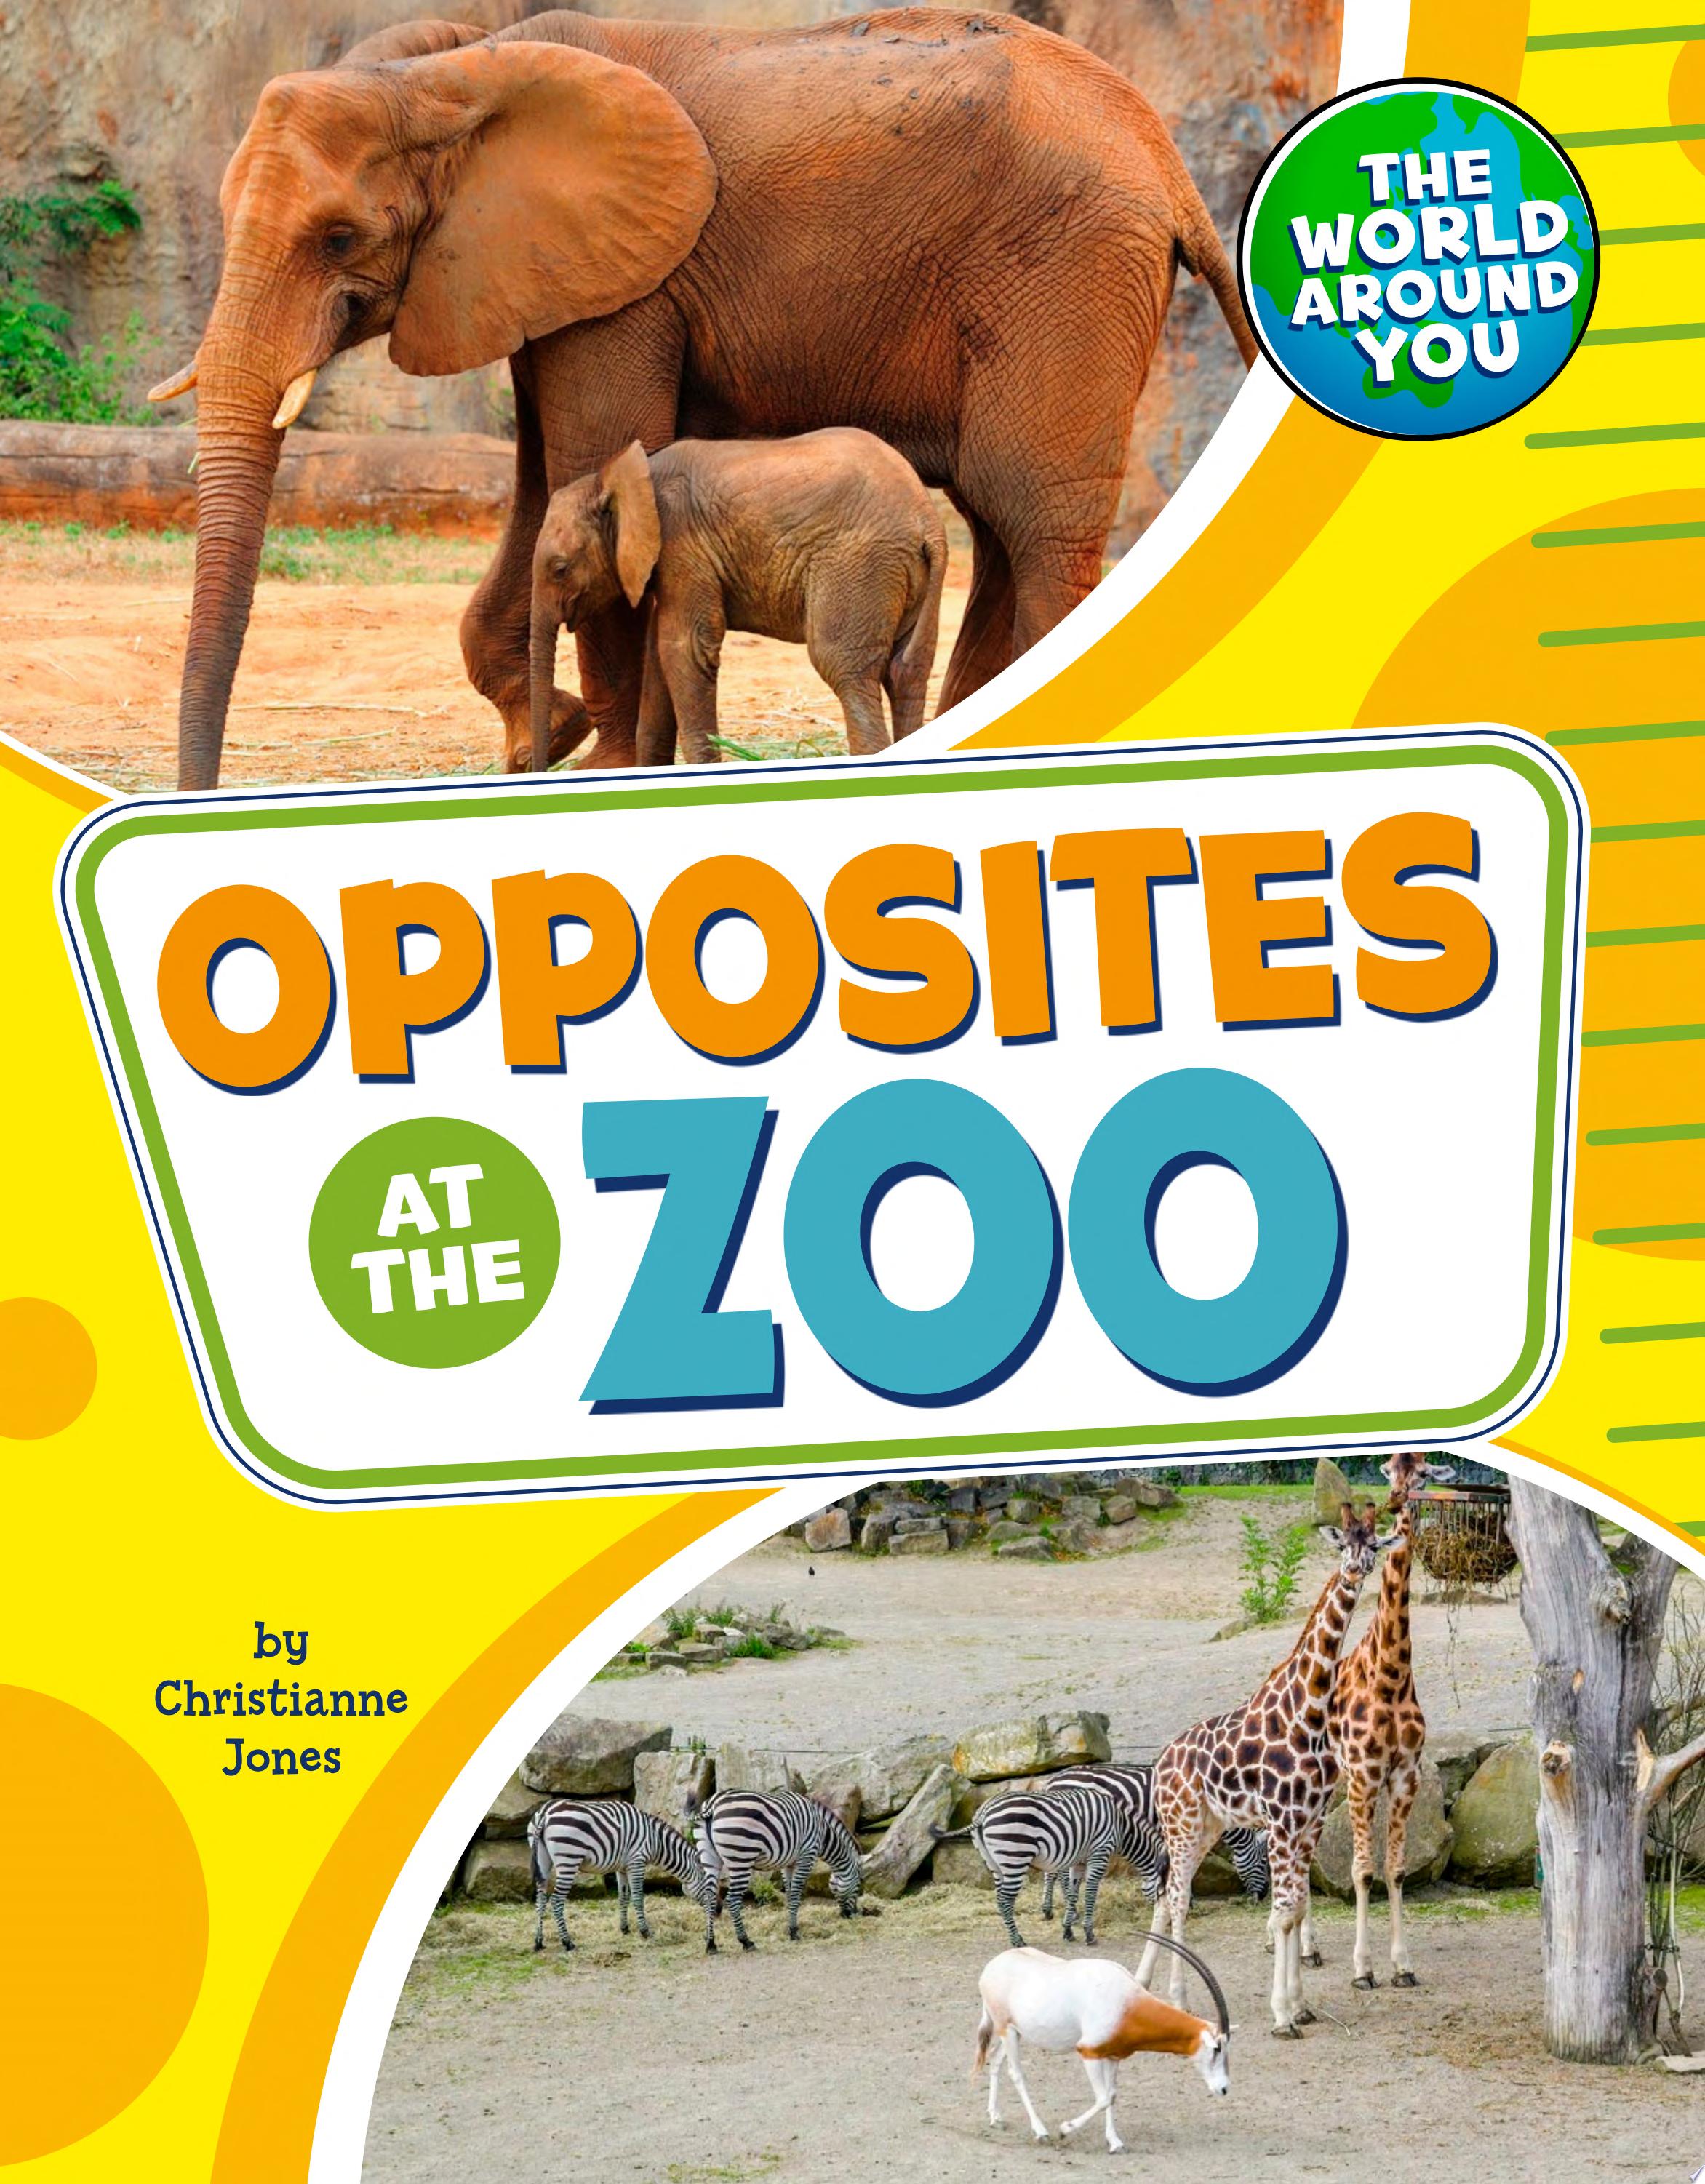 Image for "Opposites at the Zoo"